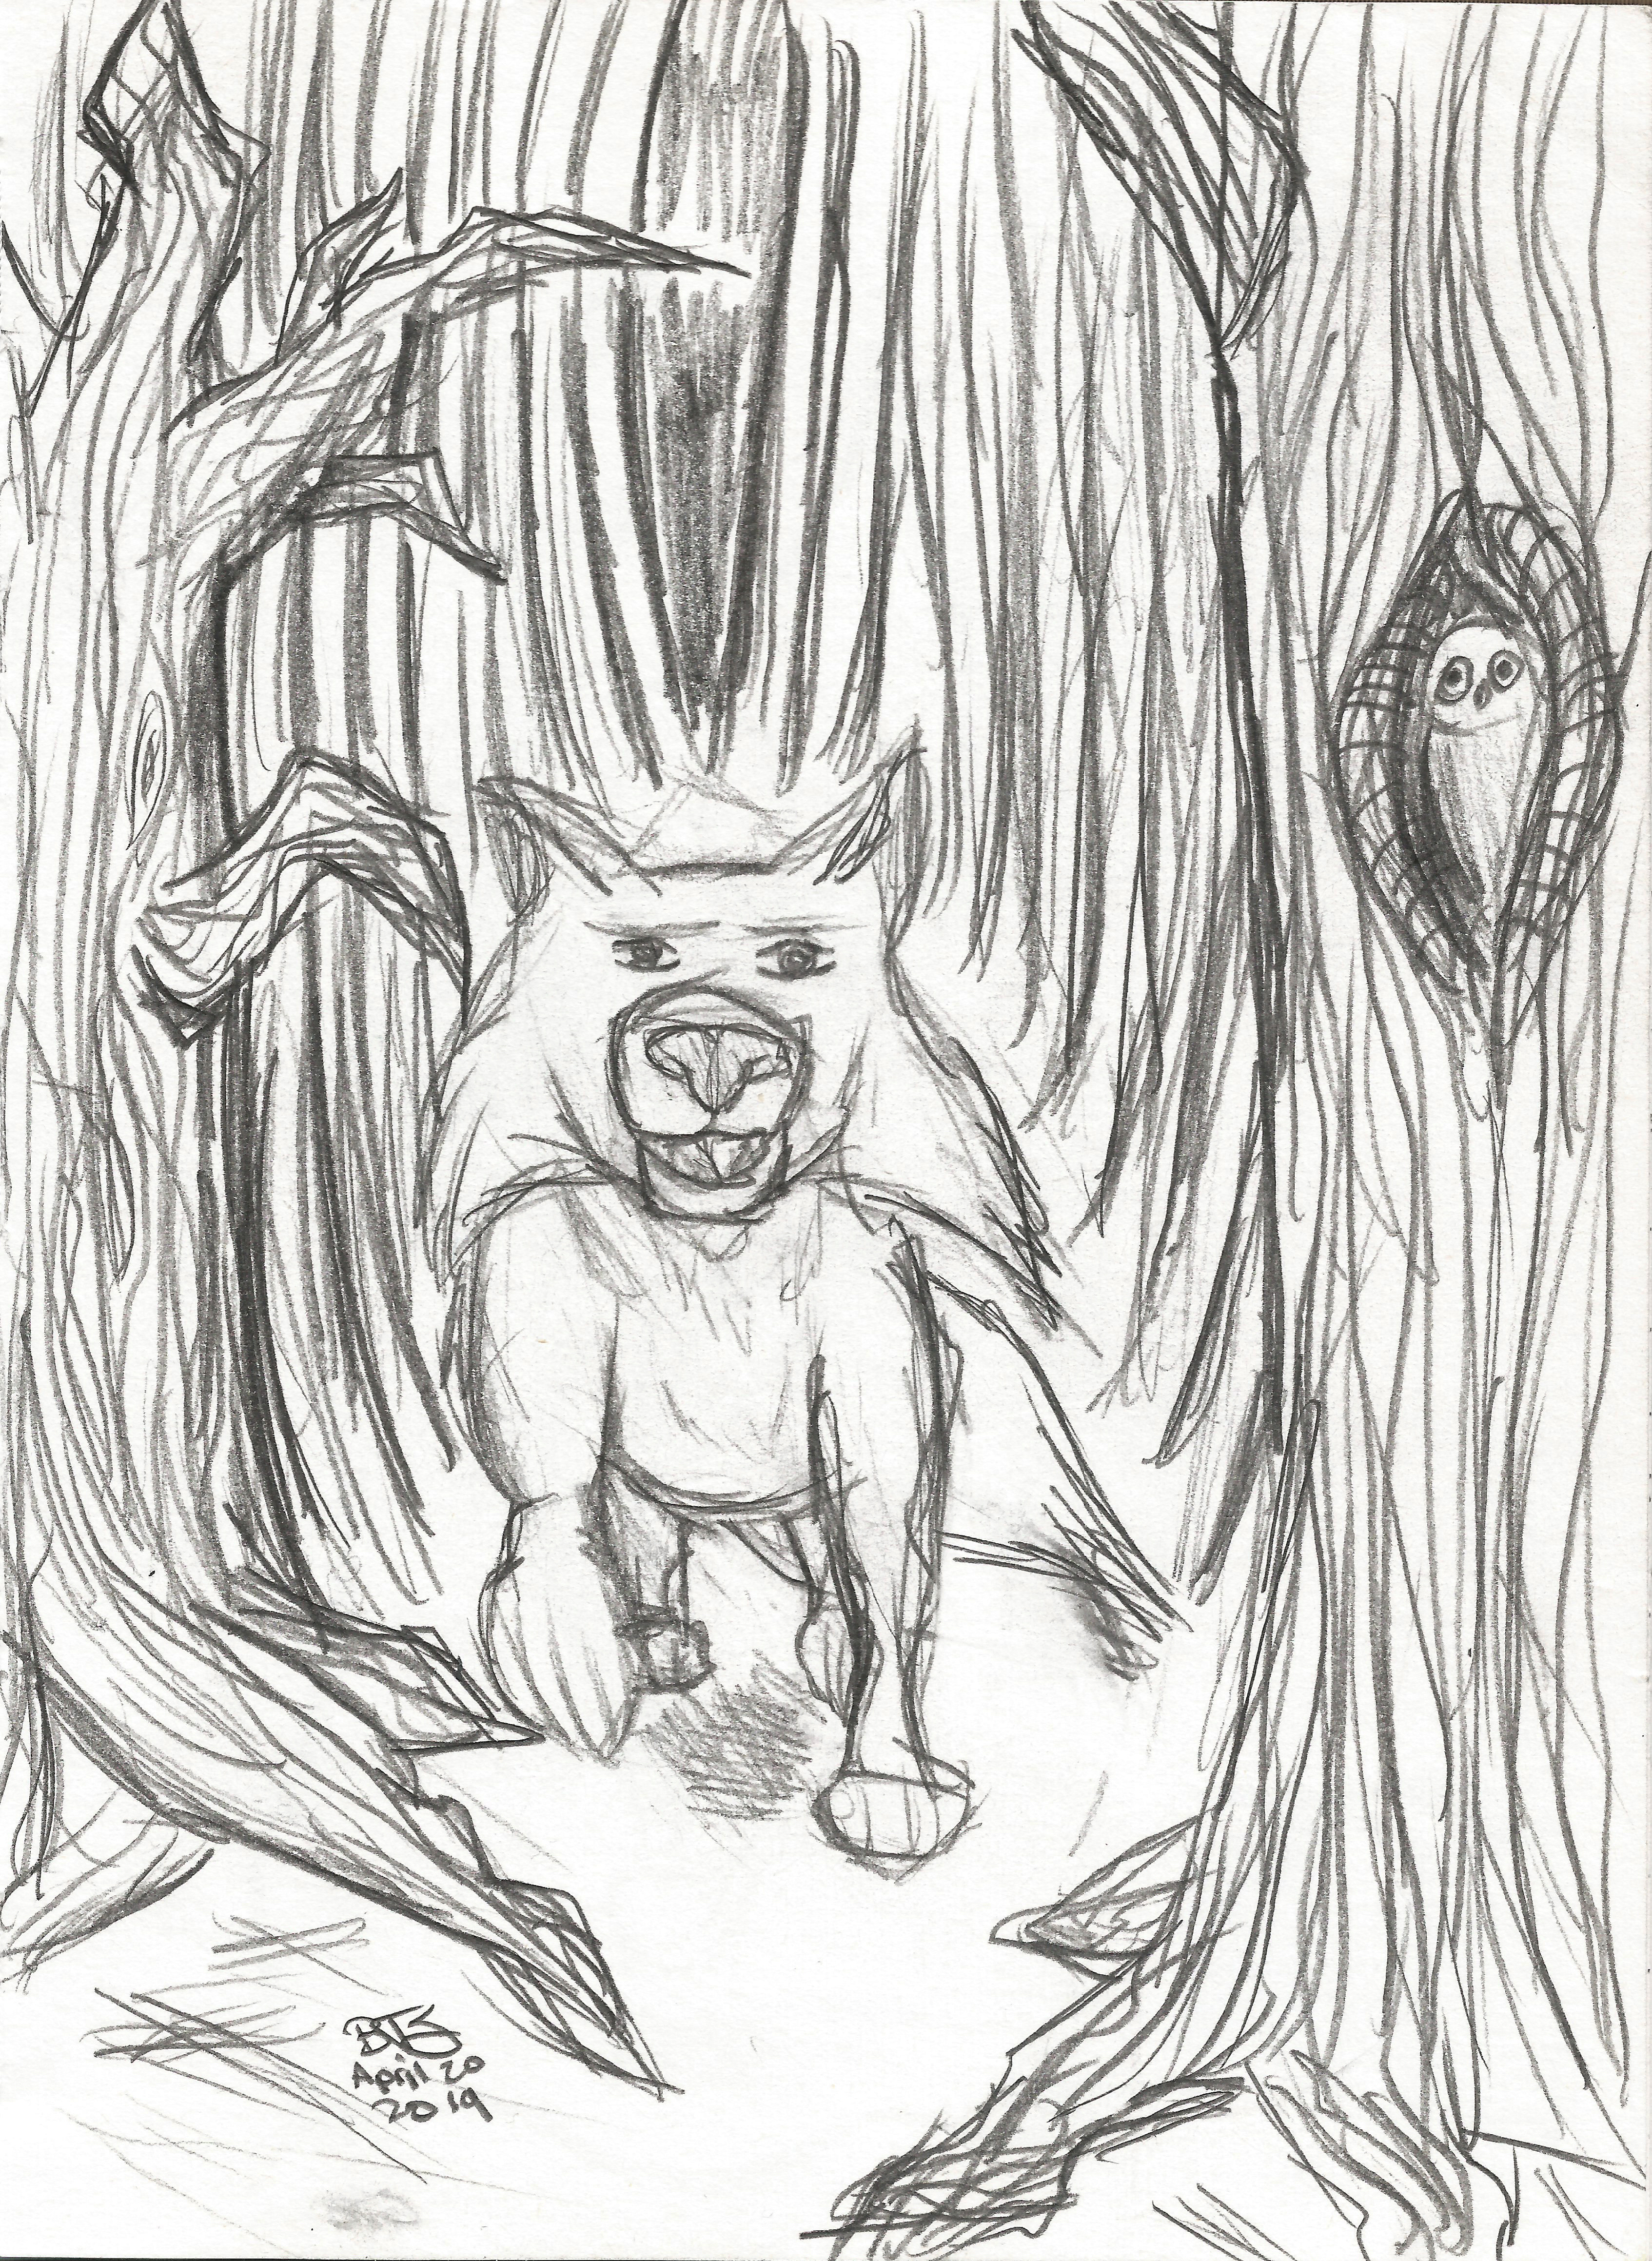 Wolf in the Woods; Pencil on Paper, April 2019